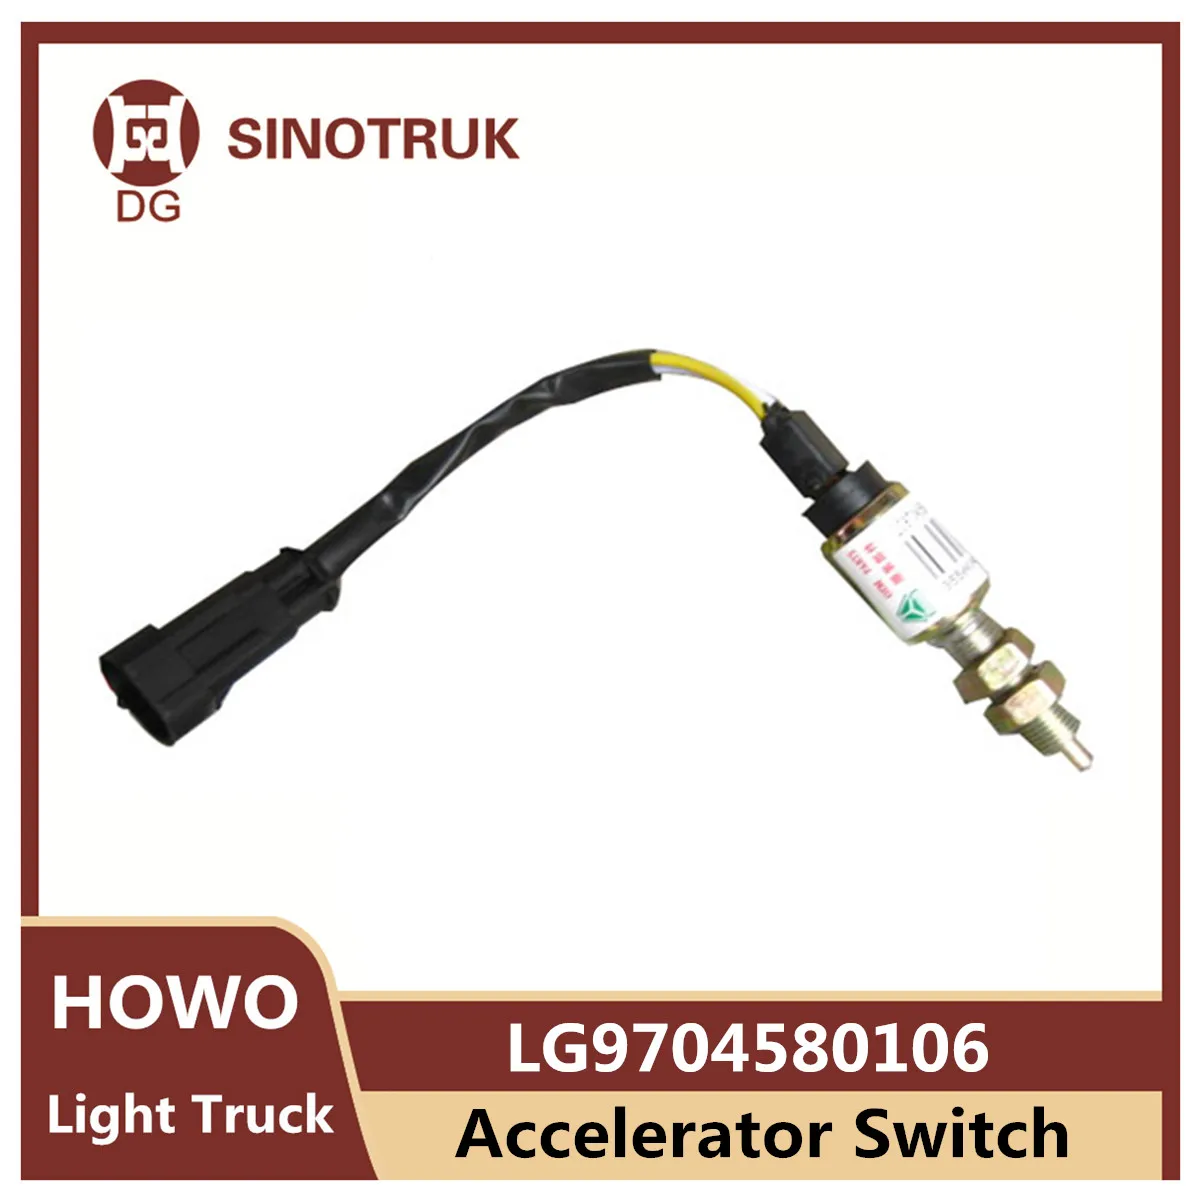 Accelerator Switch LG9704580106 for Sinotruk Howo Light Truck Clutch Switch Original Auto Truck Parts wg9725584060 pto knob 270° suitable for sinotruk howo a7 t7h t5g remote switch electronic hand throttle